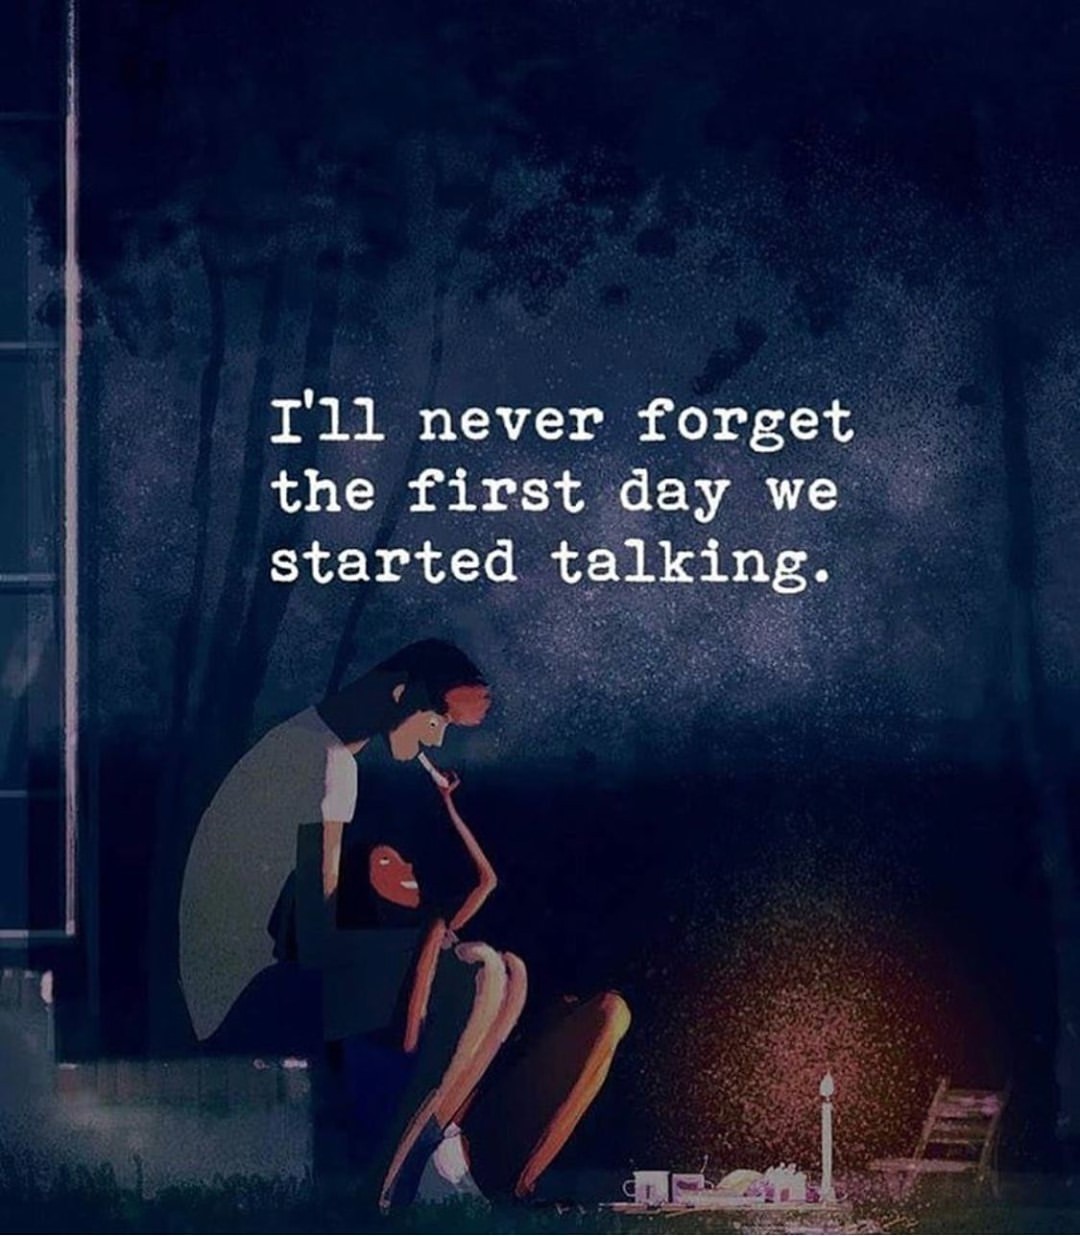 I'll never forget the first day we started talking.